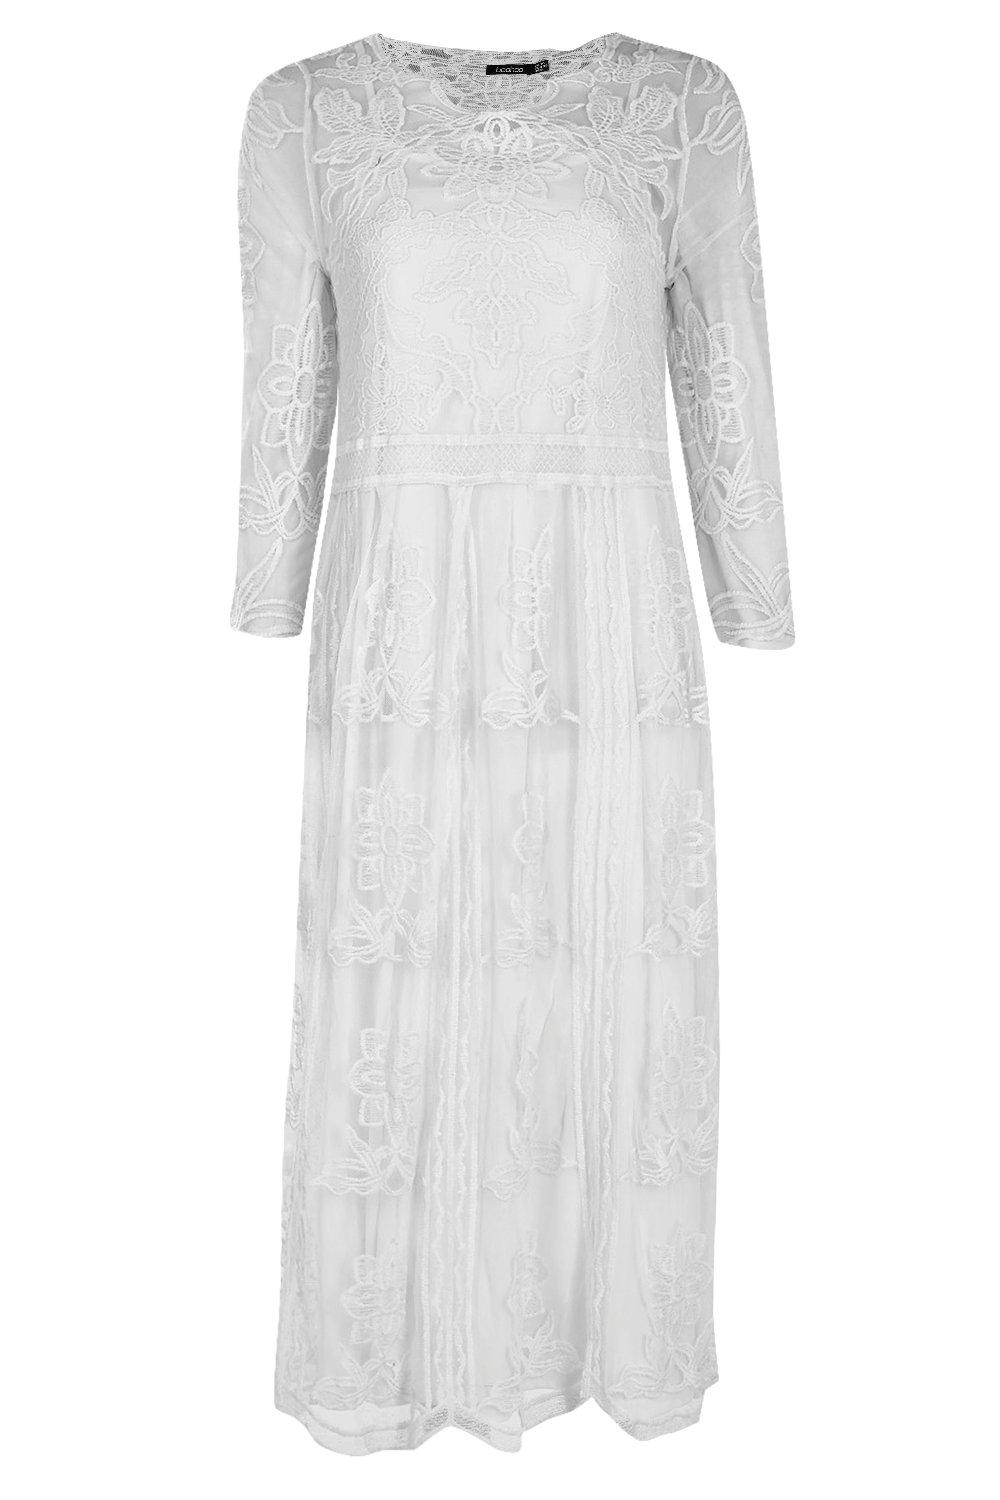 Boohoo Womens Arianne Embroidered Lace Midaxi Dress | eBay